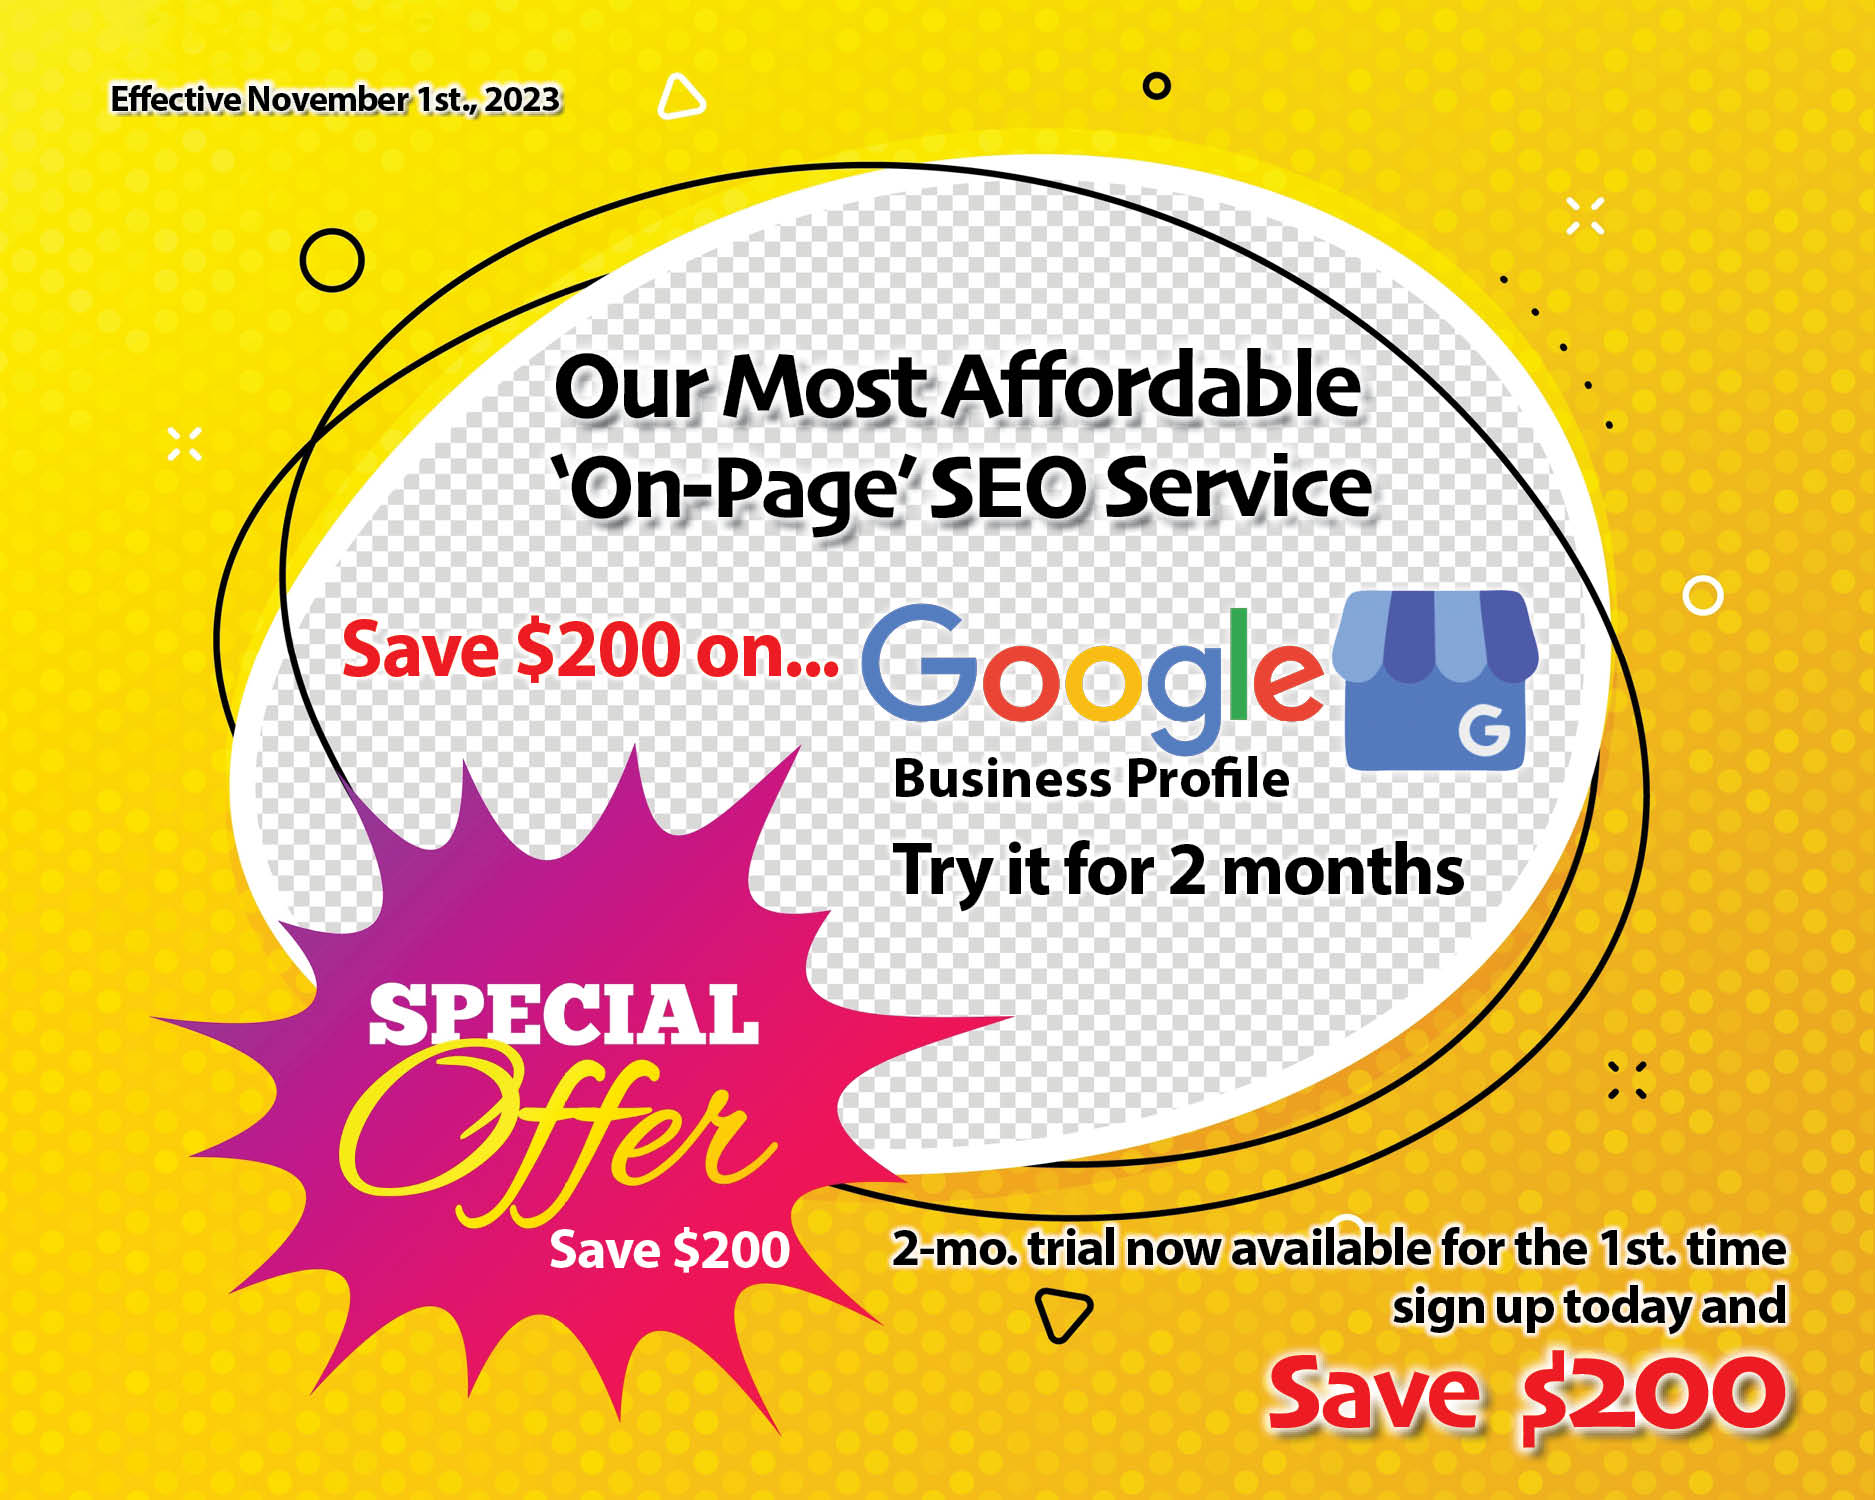 google-business-profile-special-offer-$200-discount-only-2-month-commitment-effective-november-1st-2023